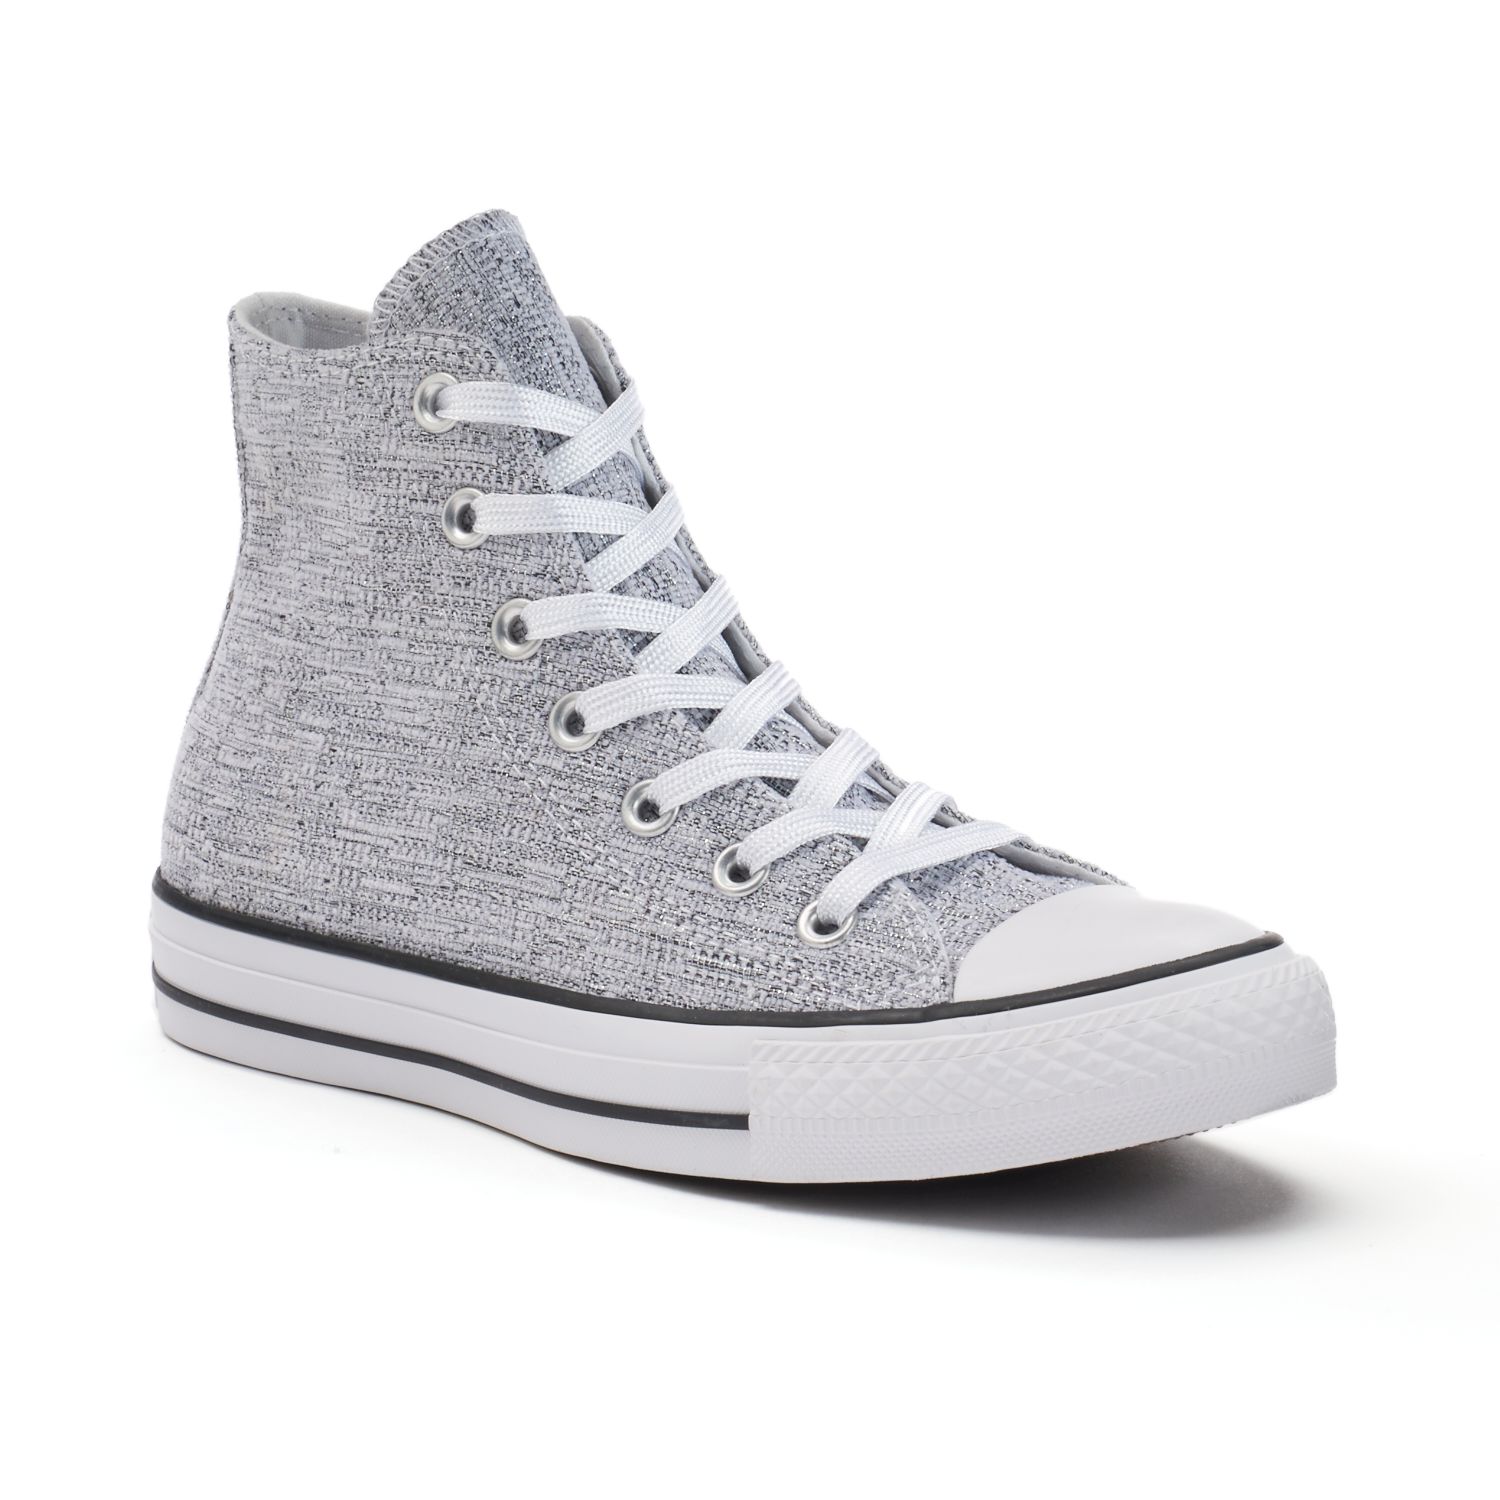 Women's Converse Chuck Taylor All Star Sparkle Knit High-Top Sneakers